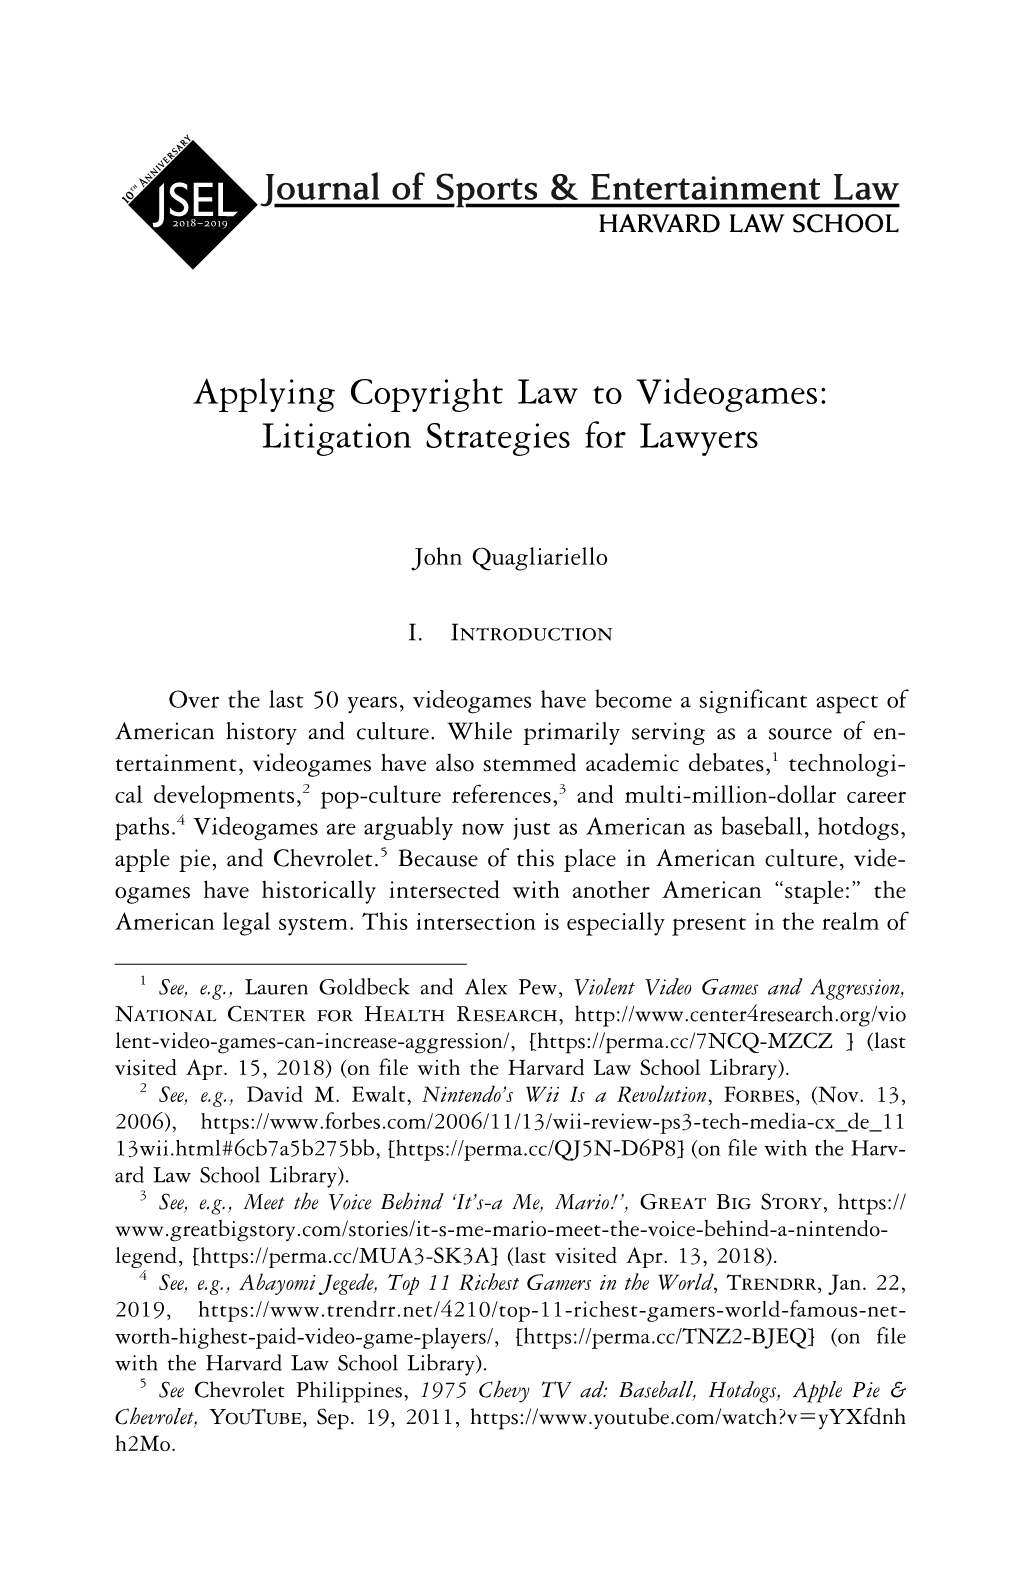 Applying Copyright Law to Videogames: Litigation Strategies for Lawyers